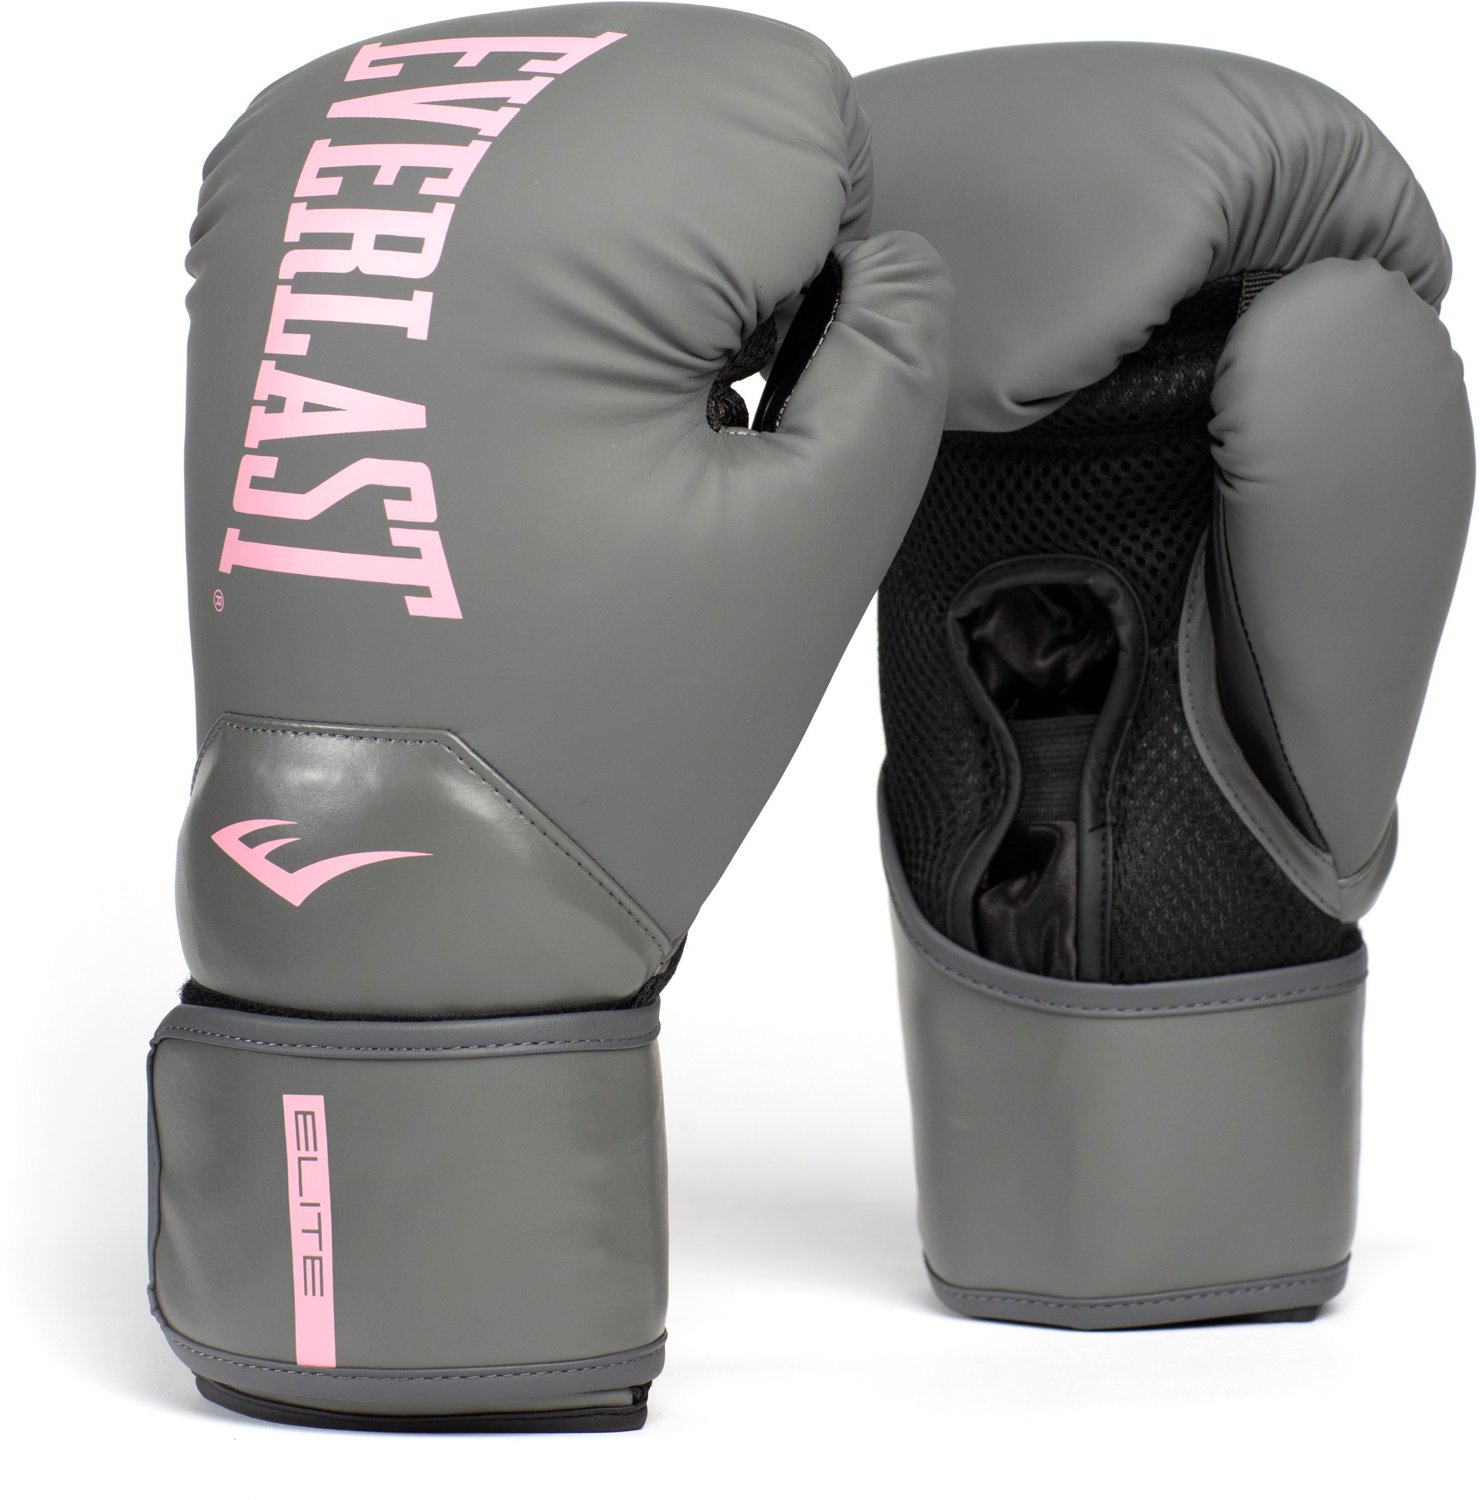 Everlast Boxing Gloves  Price Match Guaranteed